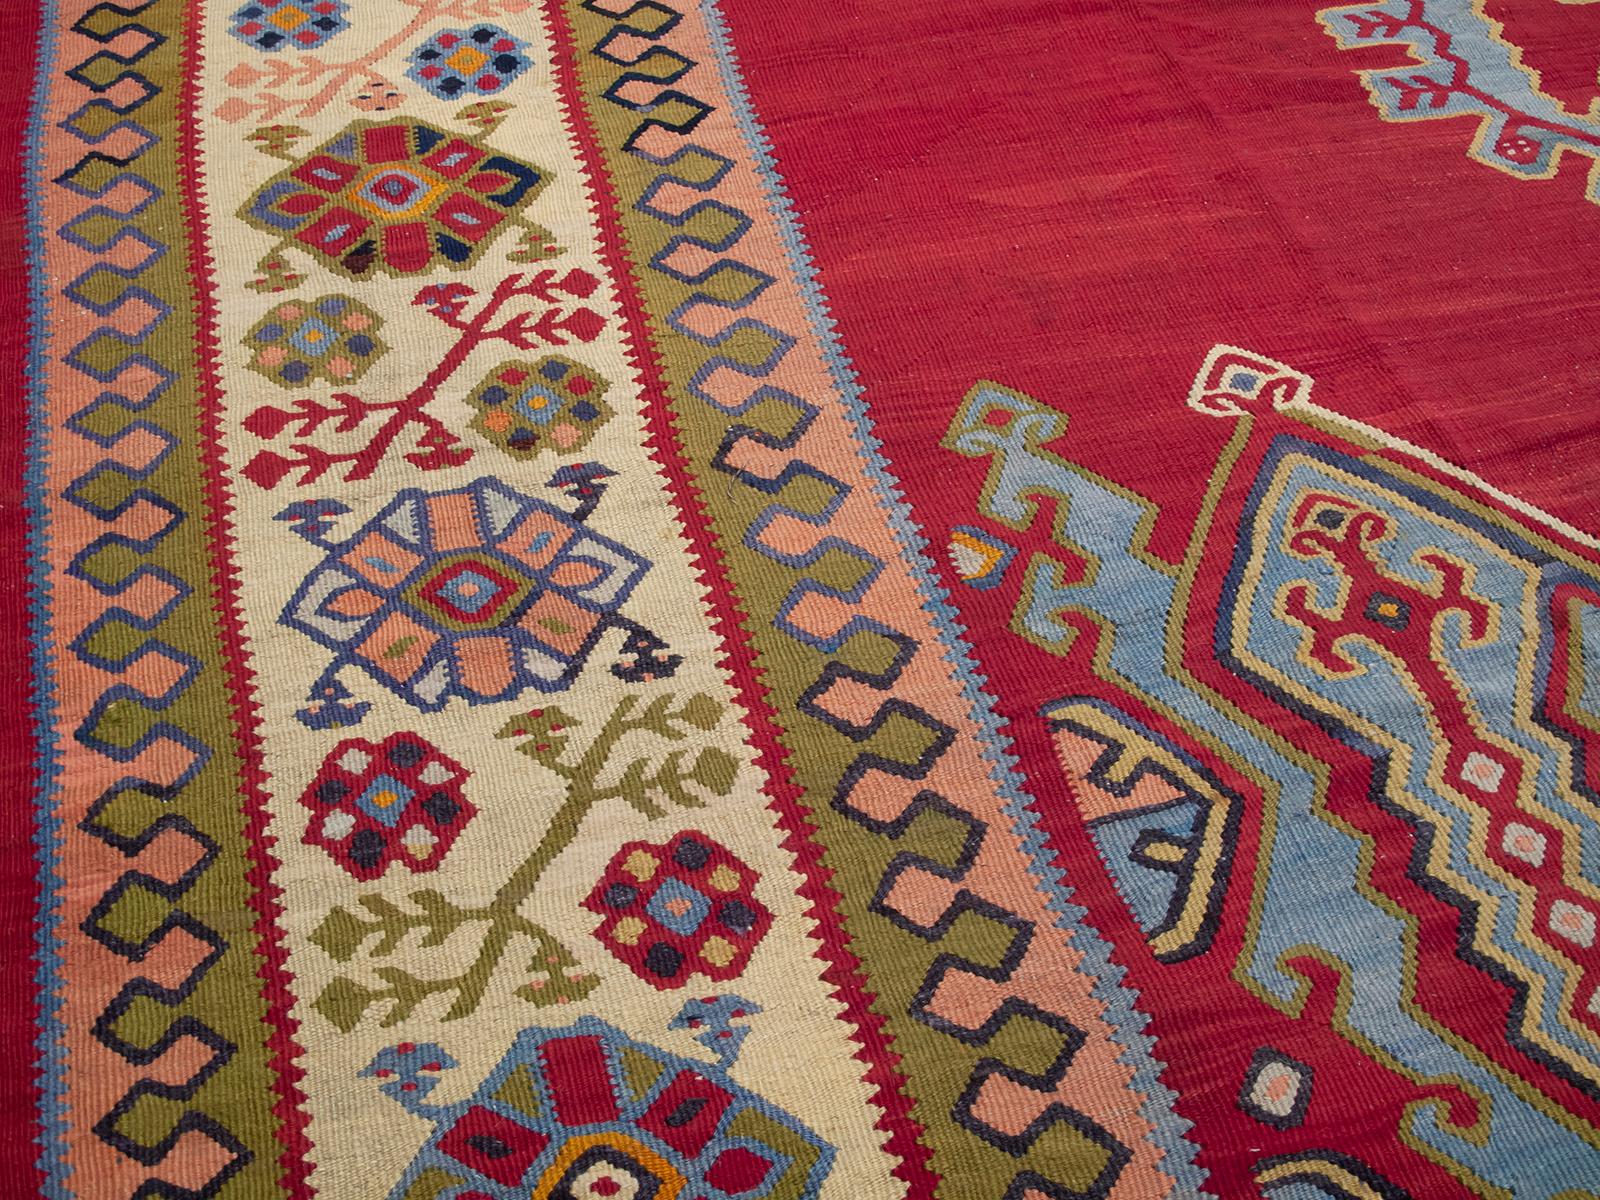 Large and Impressive Antique Oushak Kilim (DK-117-12) In Good Condition For Sale In New York, NY